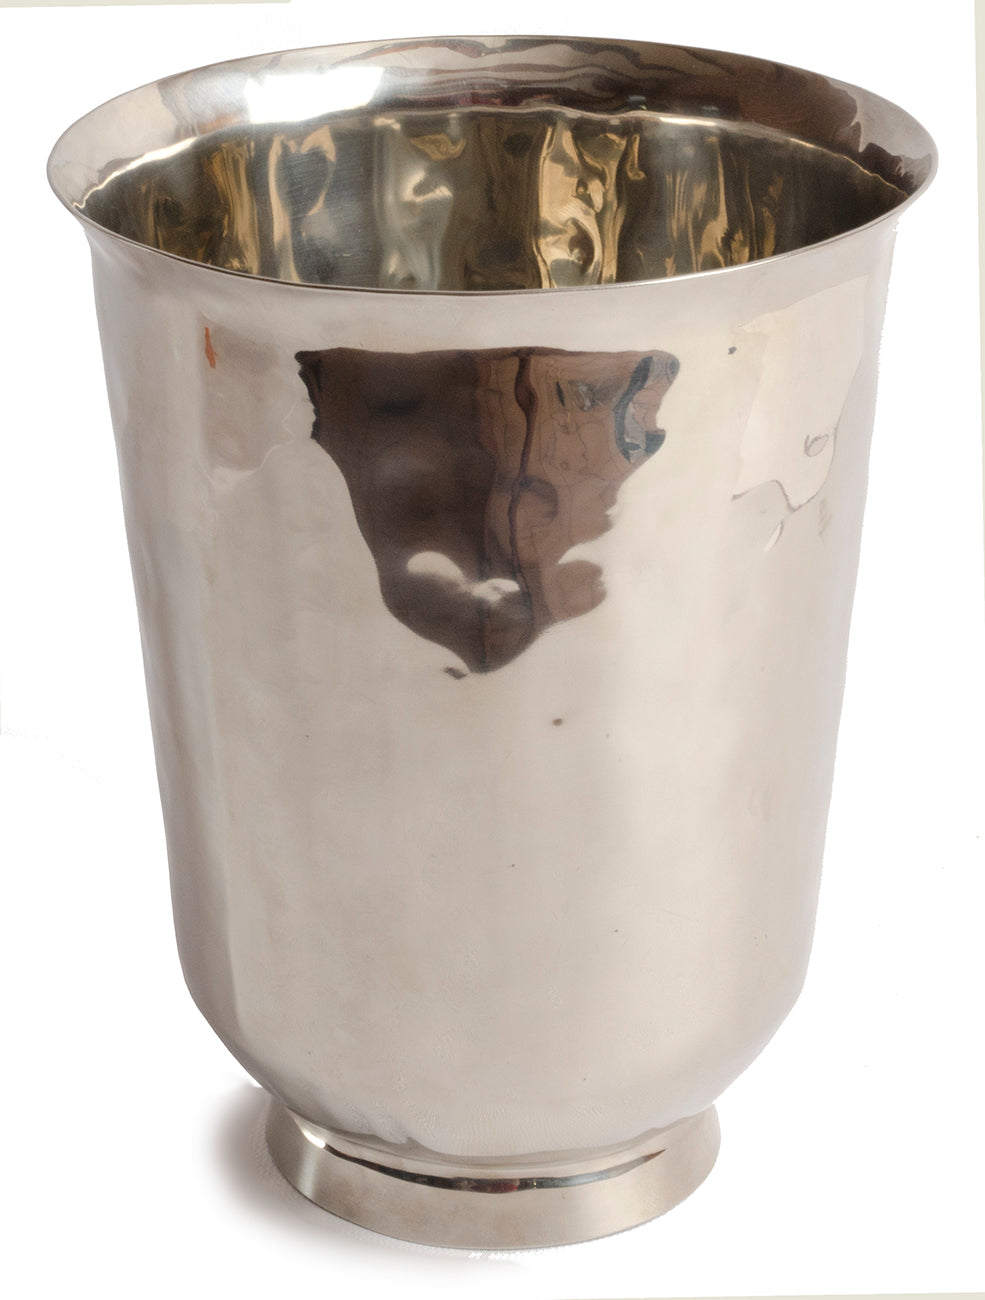 Hammered & Polished Tulip Wine Bucket (Hammered Stainless Steel)